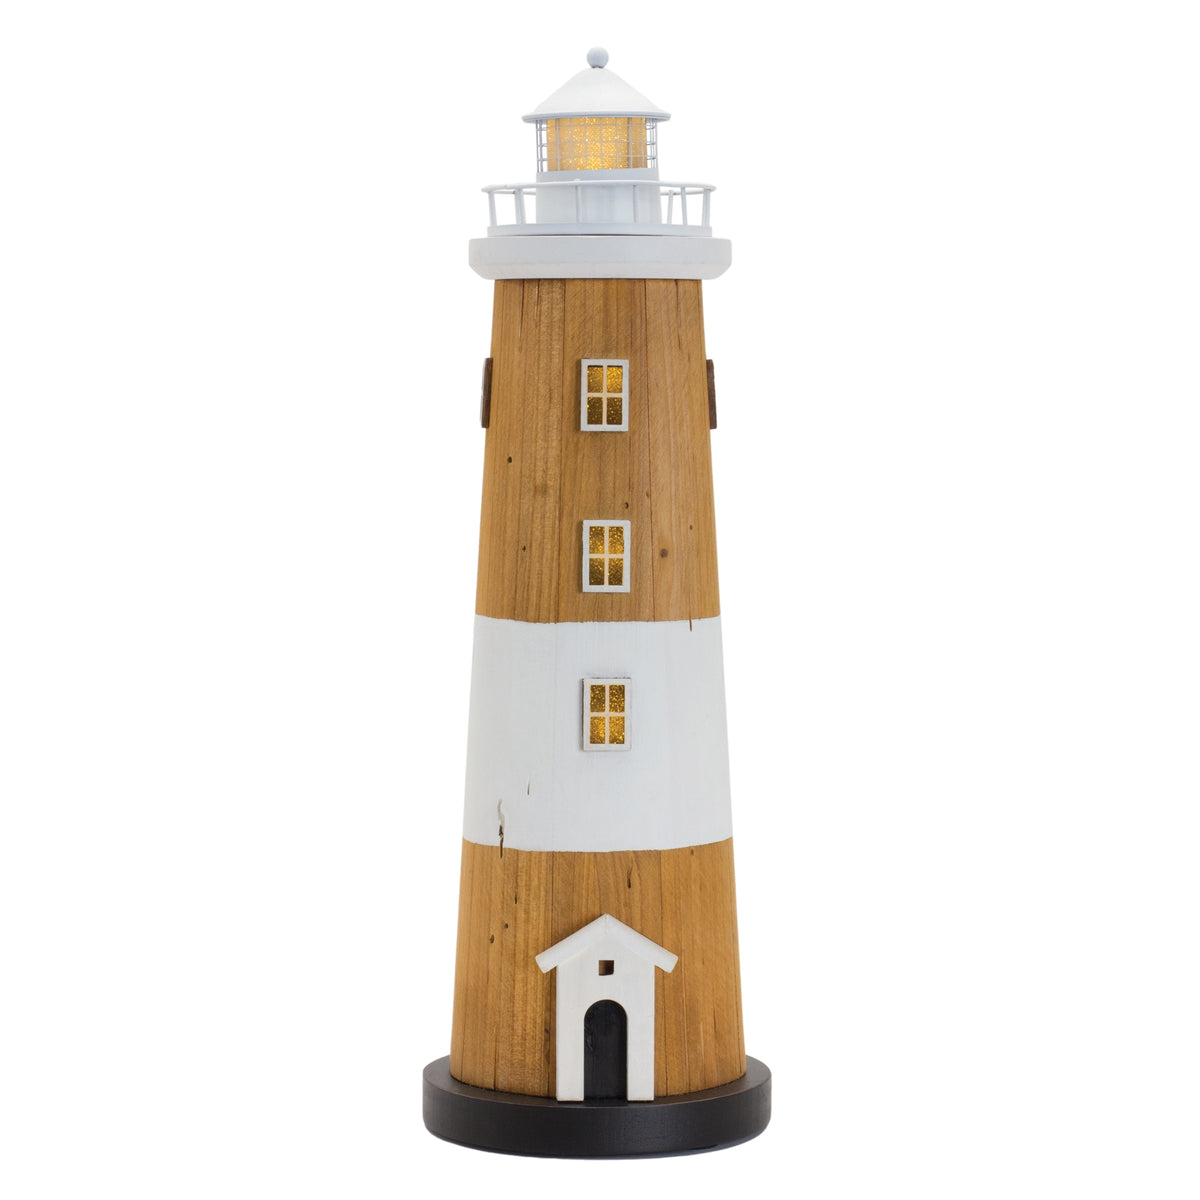 Wooden Lighthouse with Real Lights!